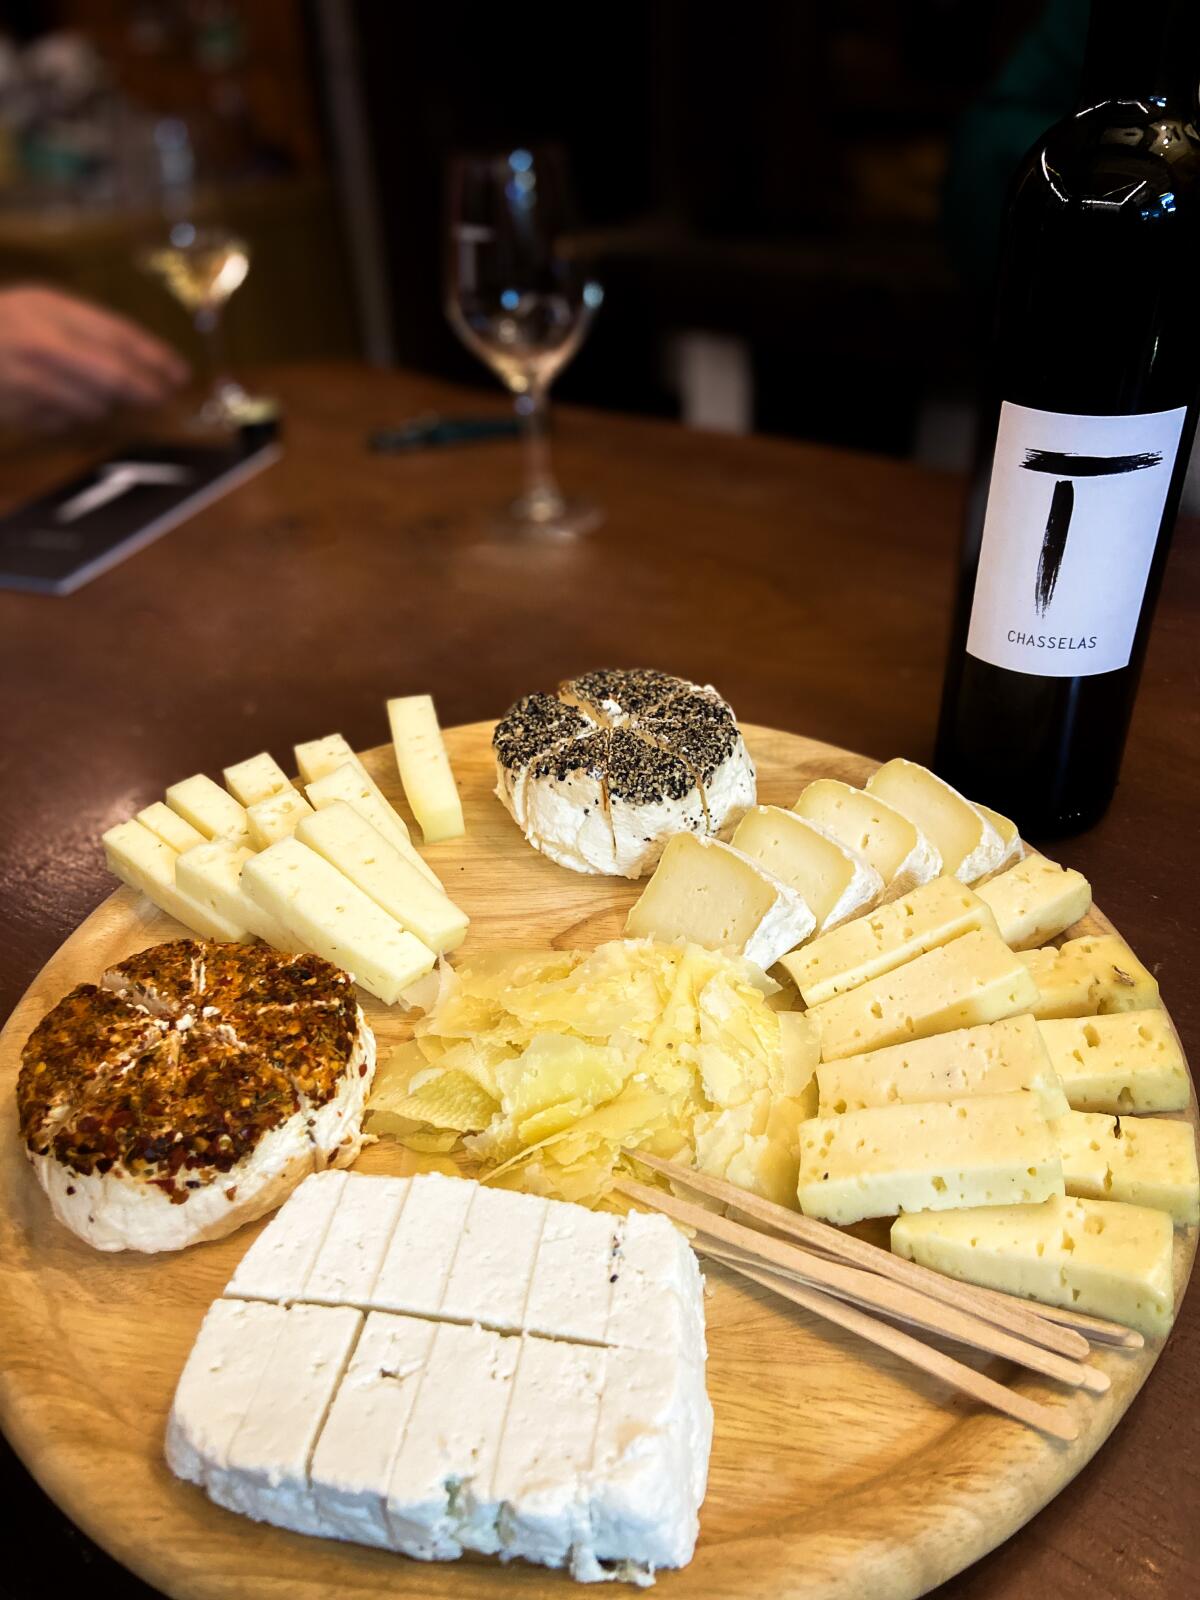 Sampling house wines and local cheeses at Cave le Tambourin Winery.